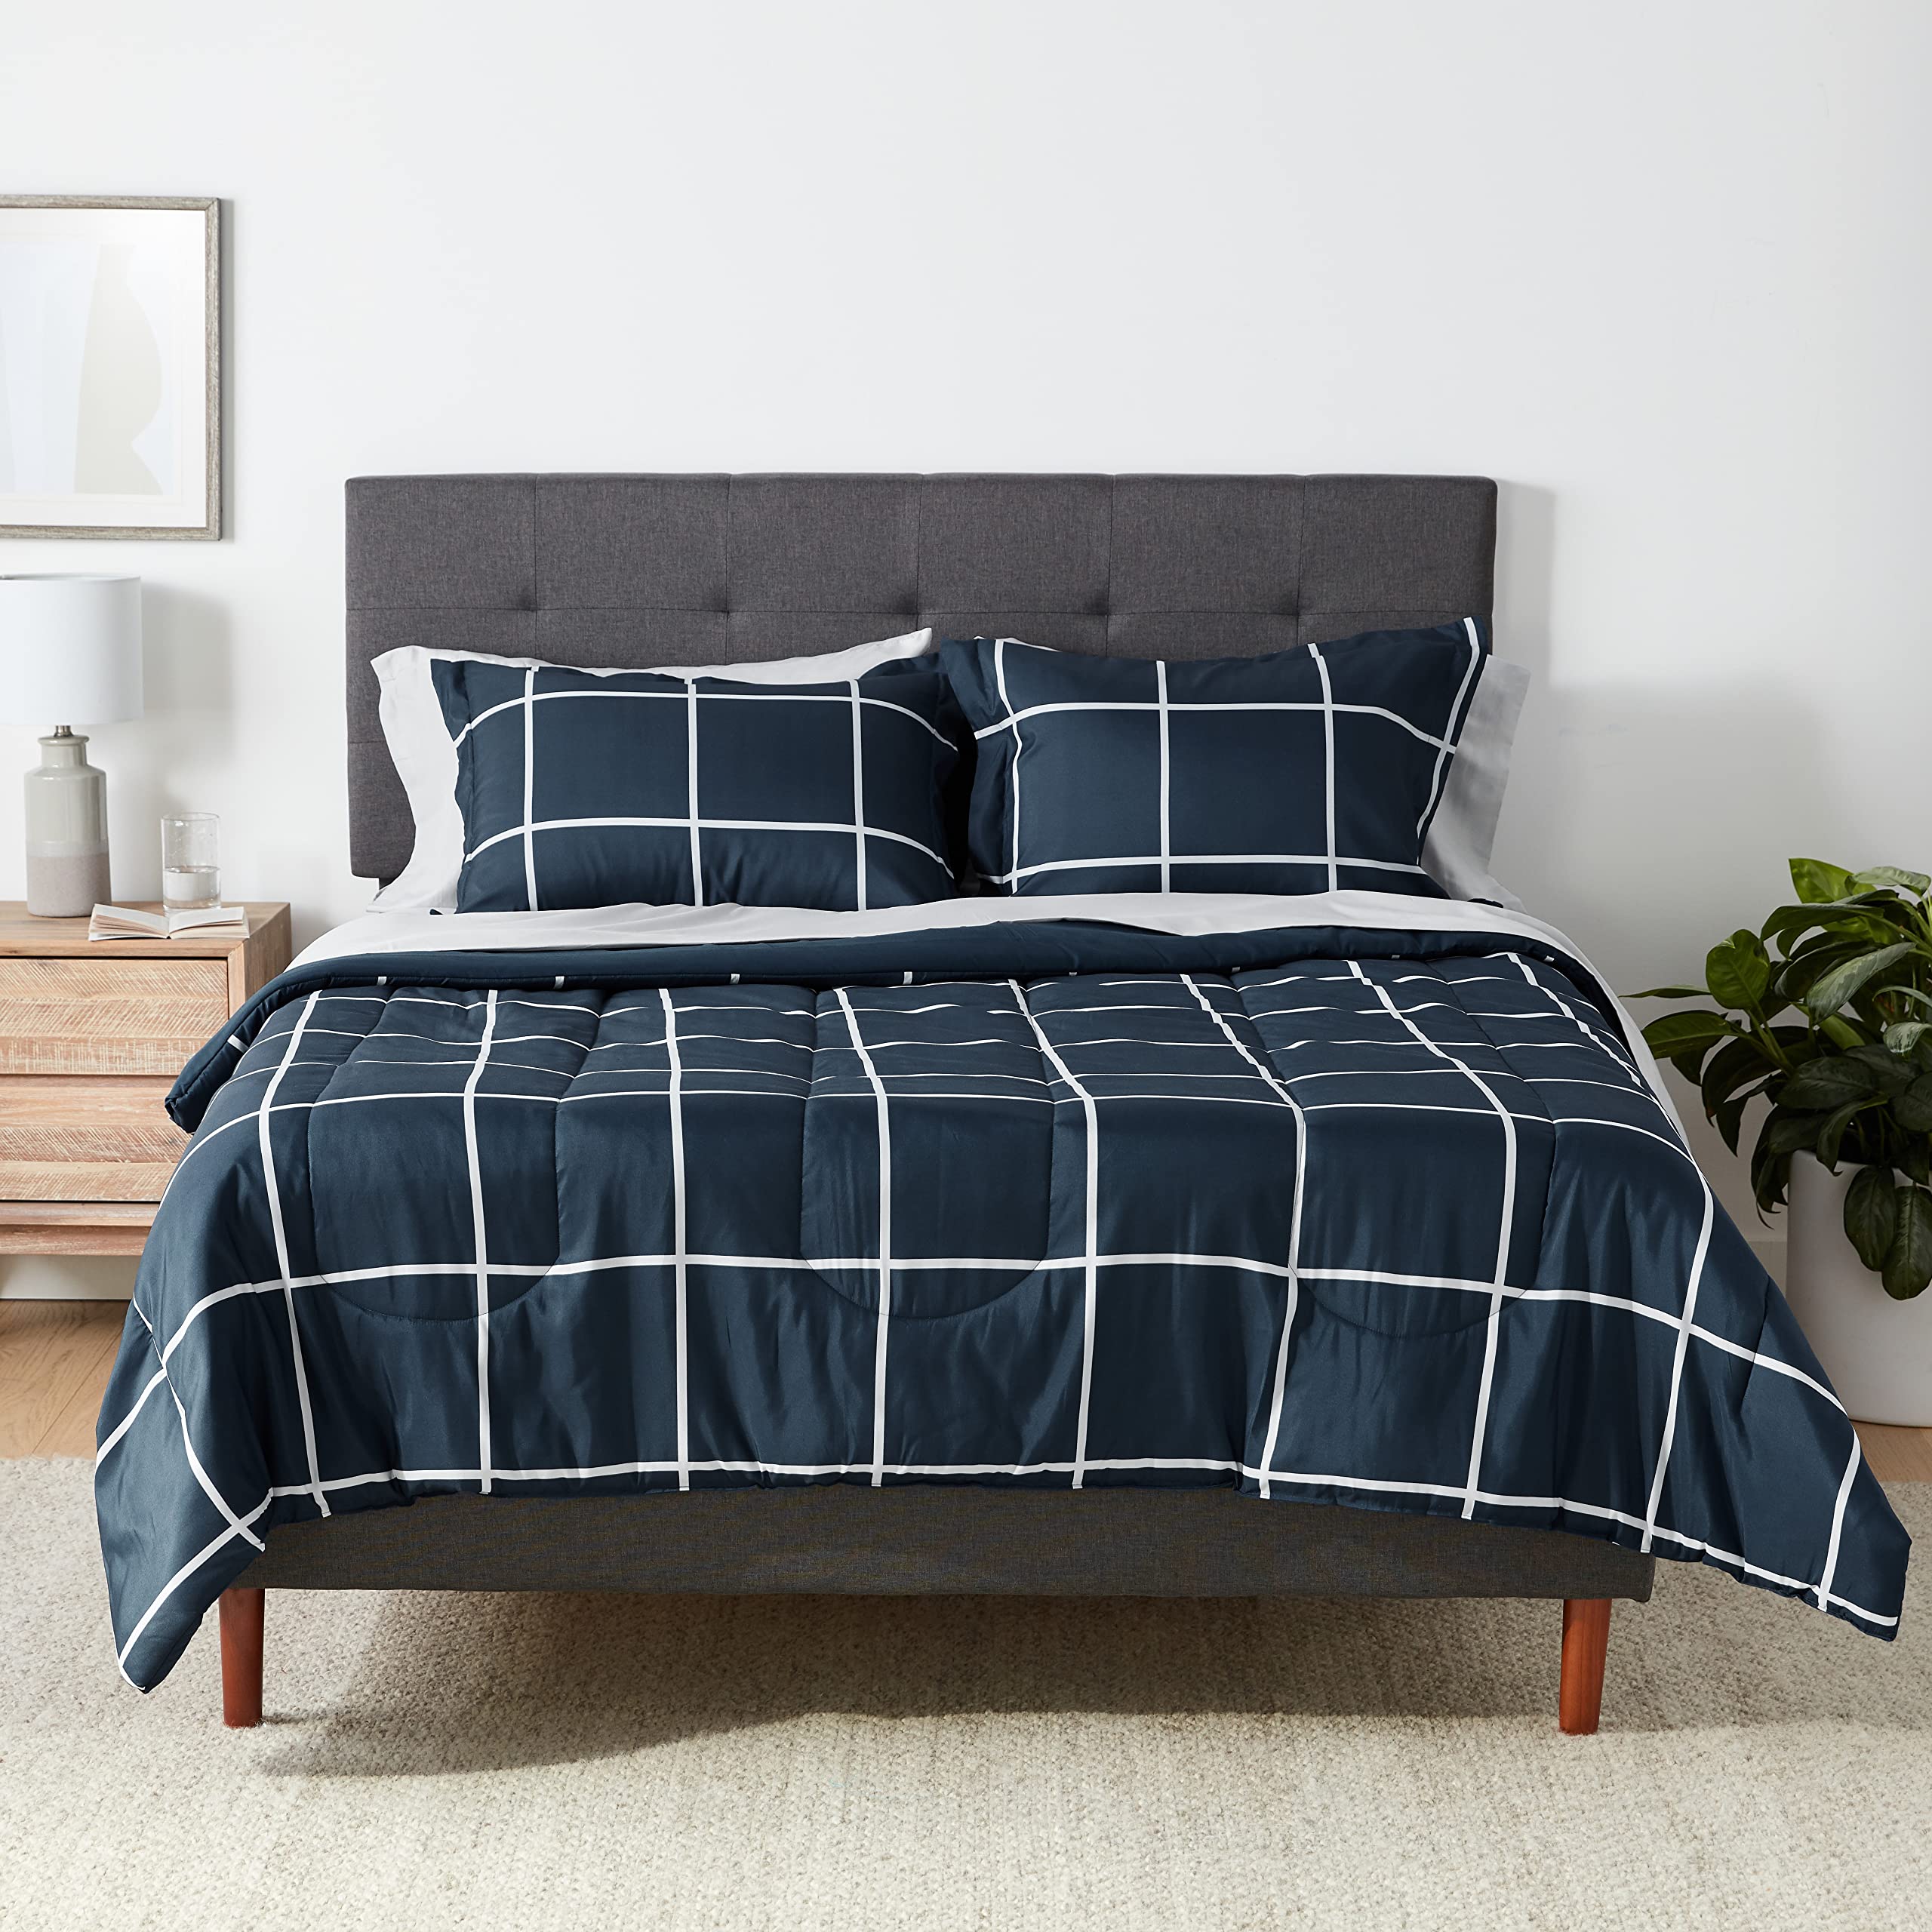 7-Piece Amazon Basics Lightweight Microfiber Bed-in-a-Bag Comforter Bedding Set (Full/Queen, Navy w/ Simple Plaid) $26.84 + Free Shipping w/ Prime or on $35+